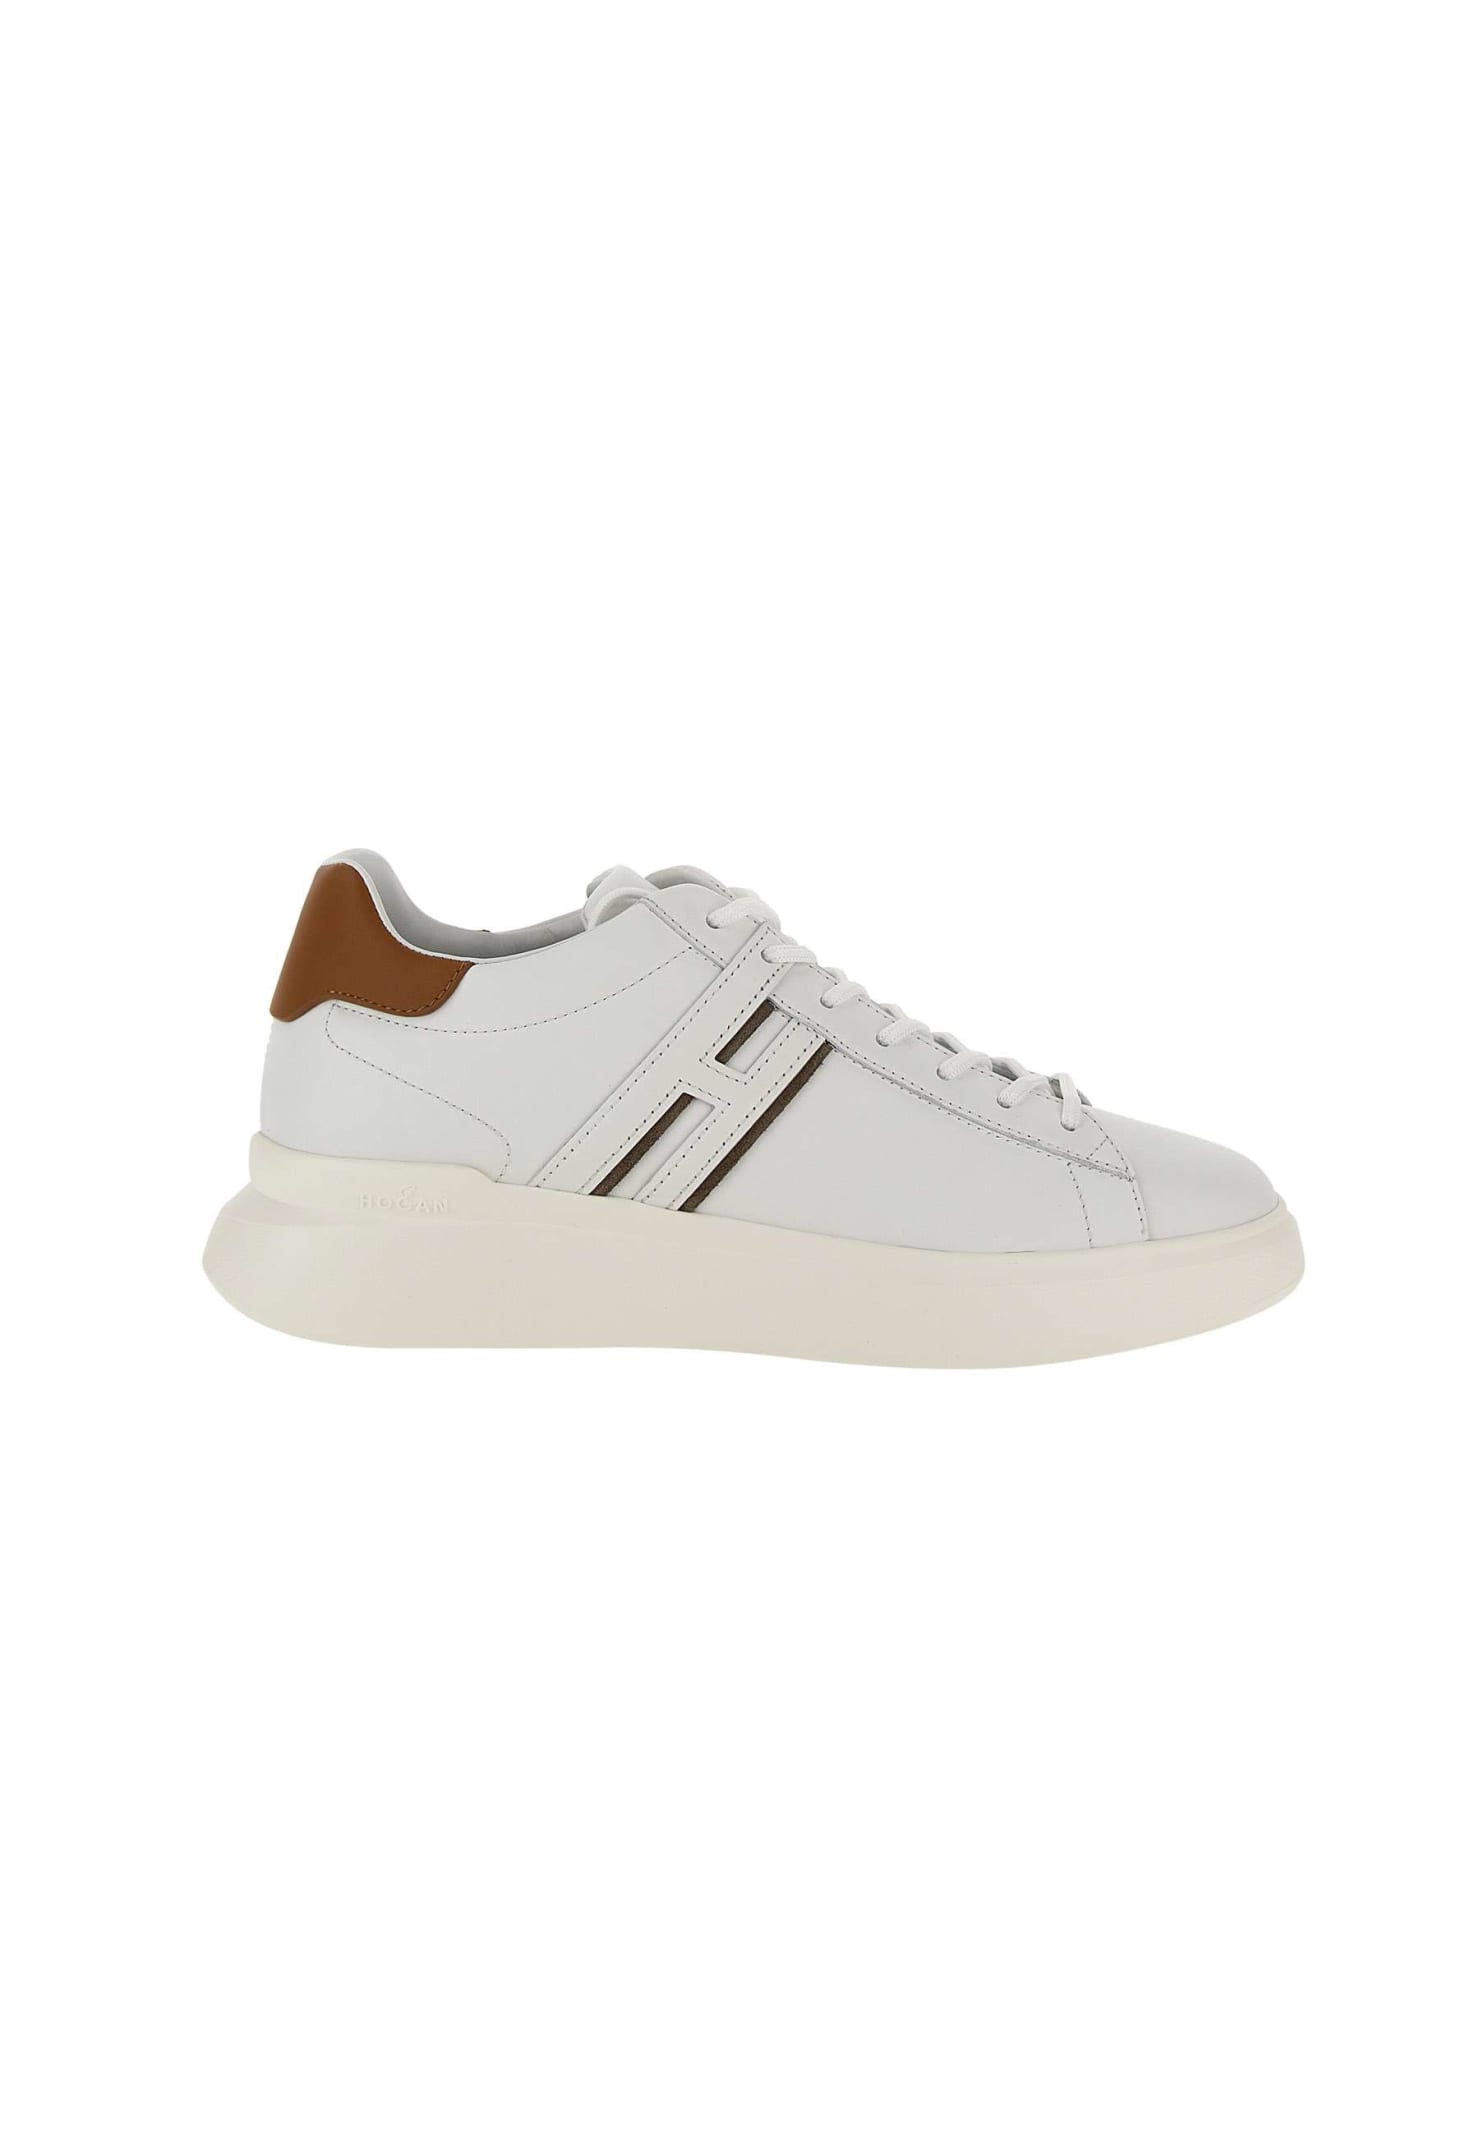 Hogan H580 Leather Sneakers In White